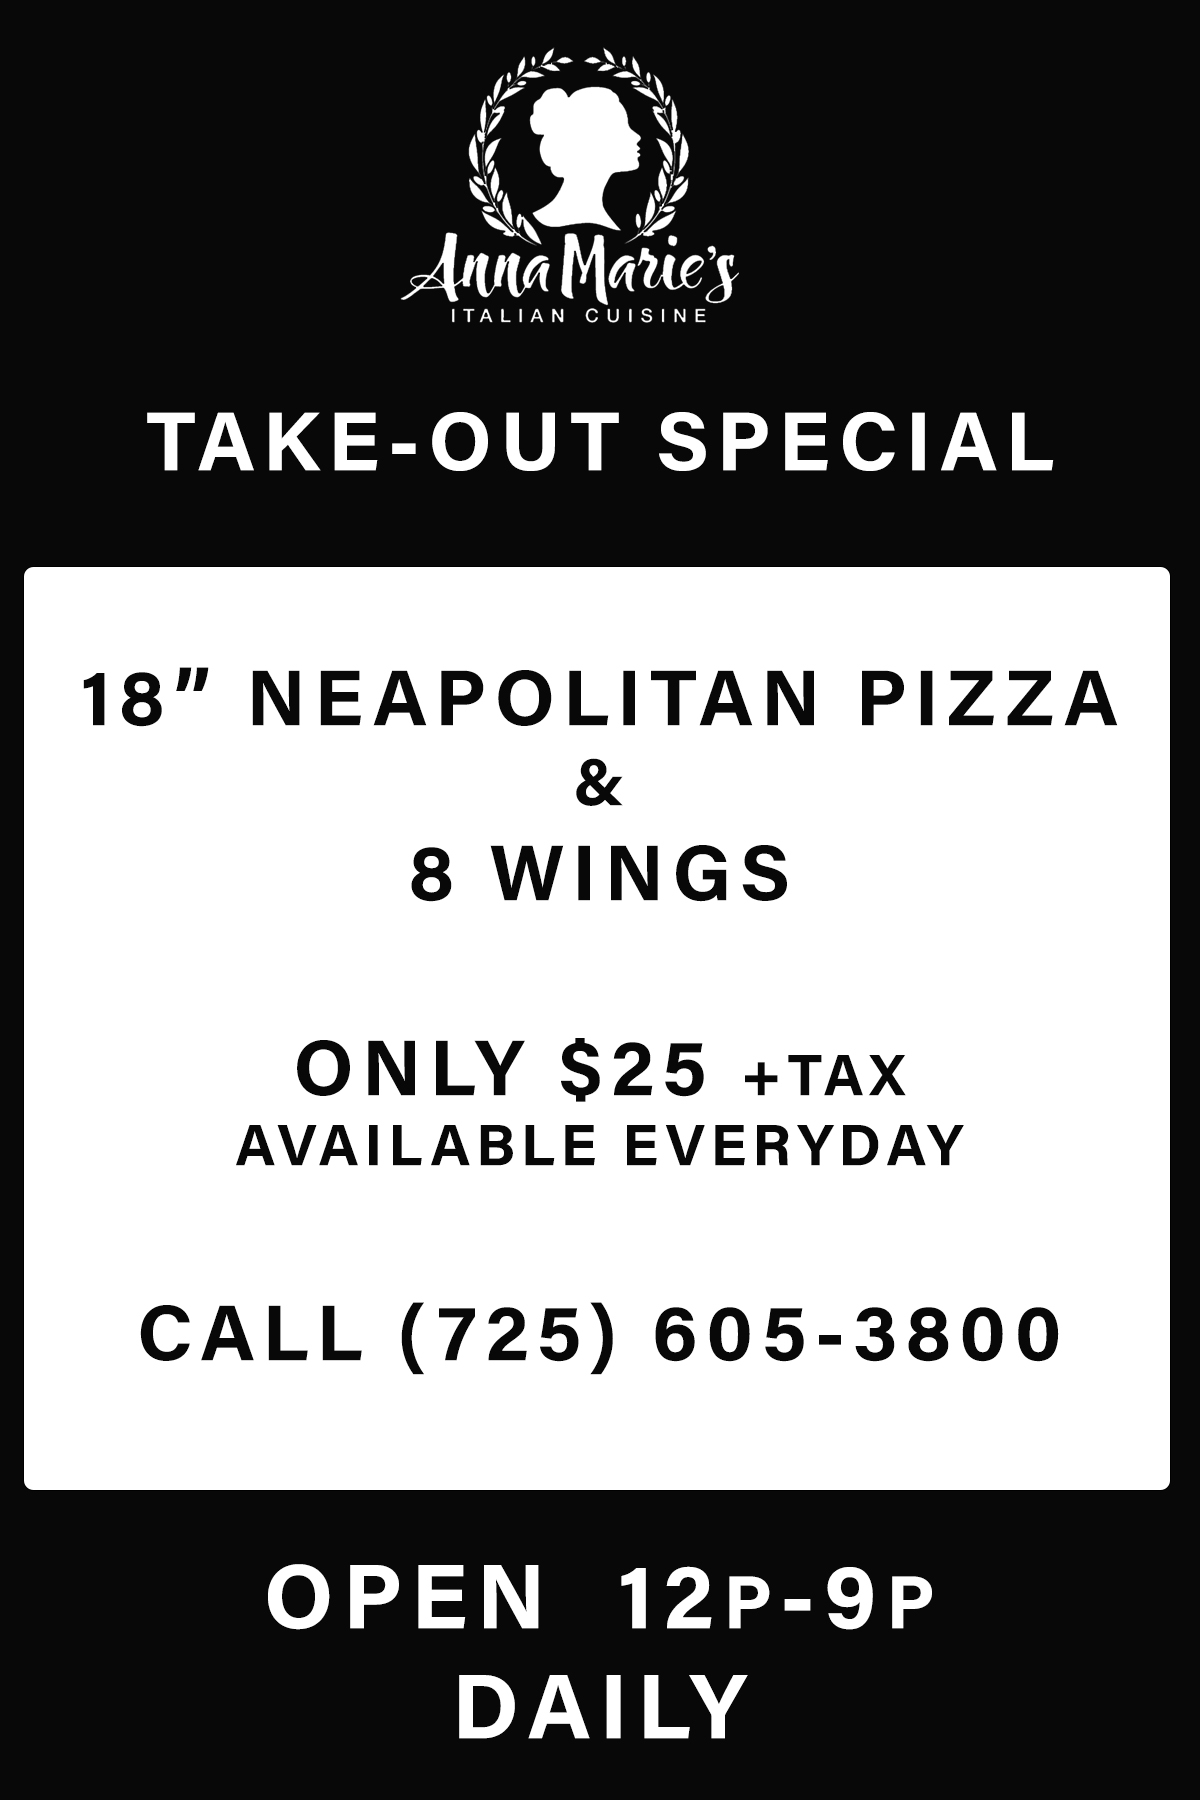 Take-Out Special